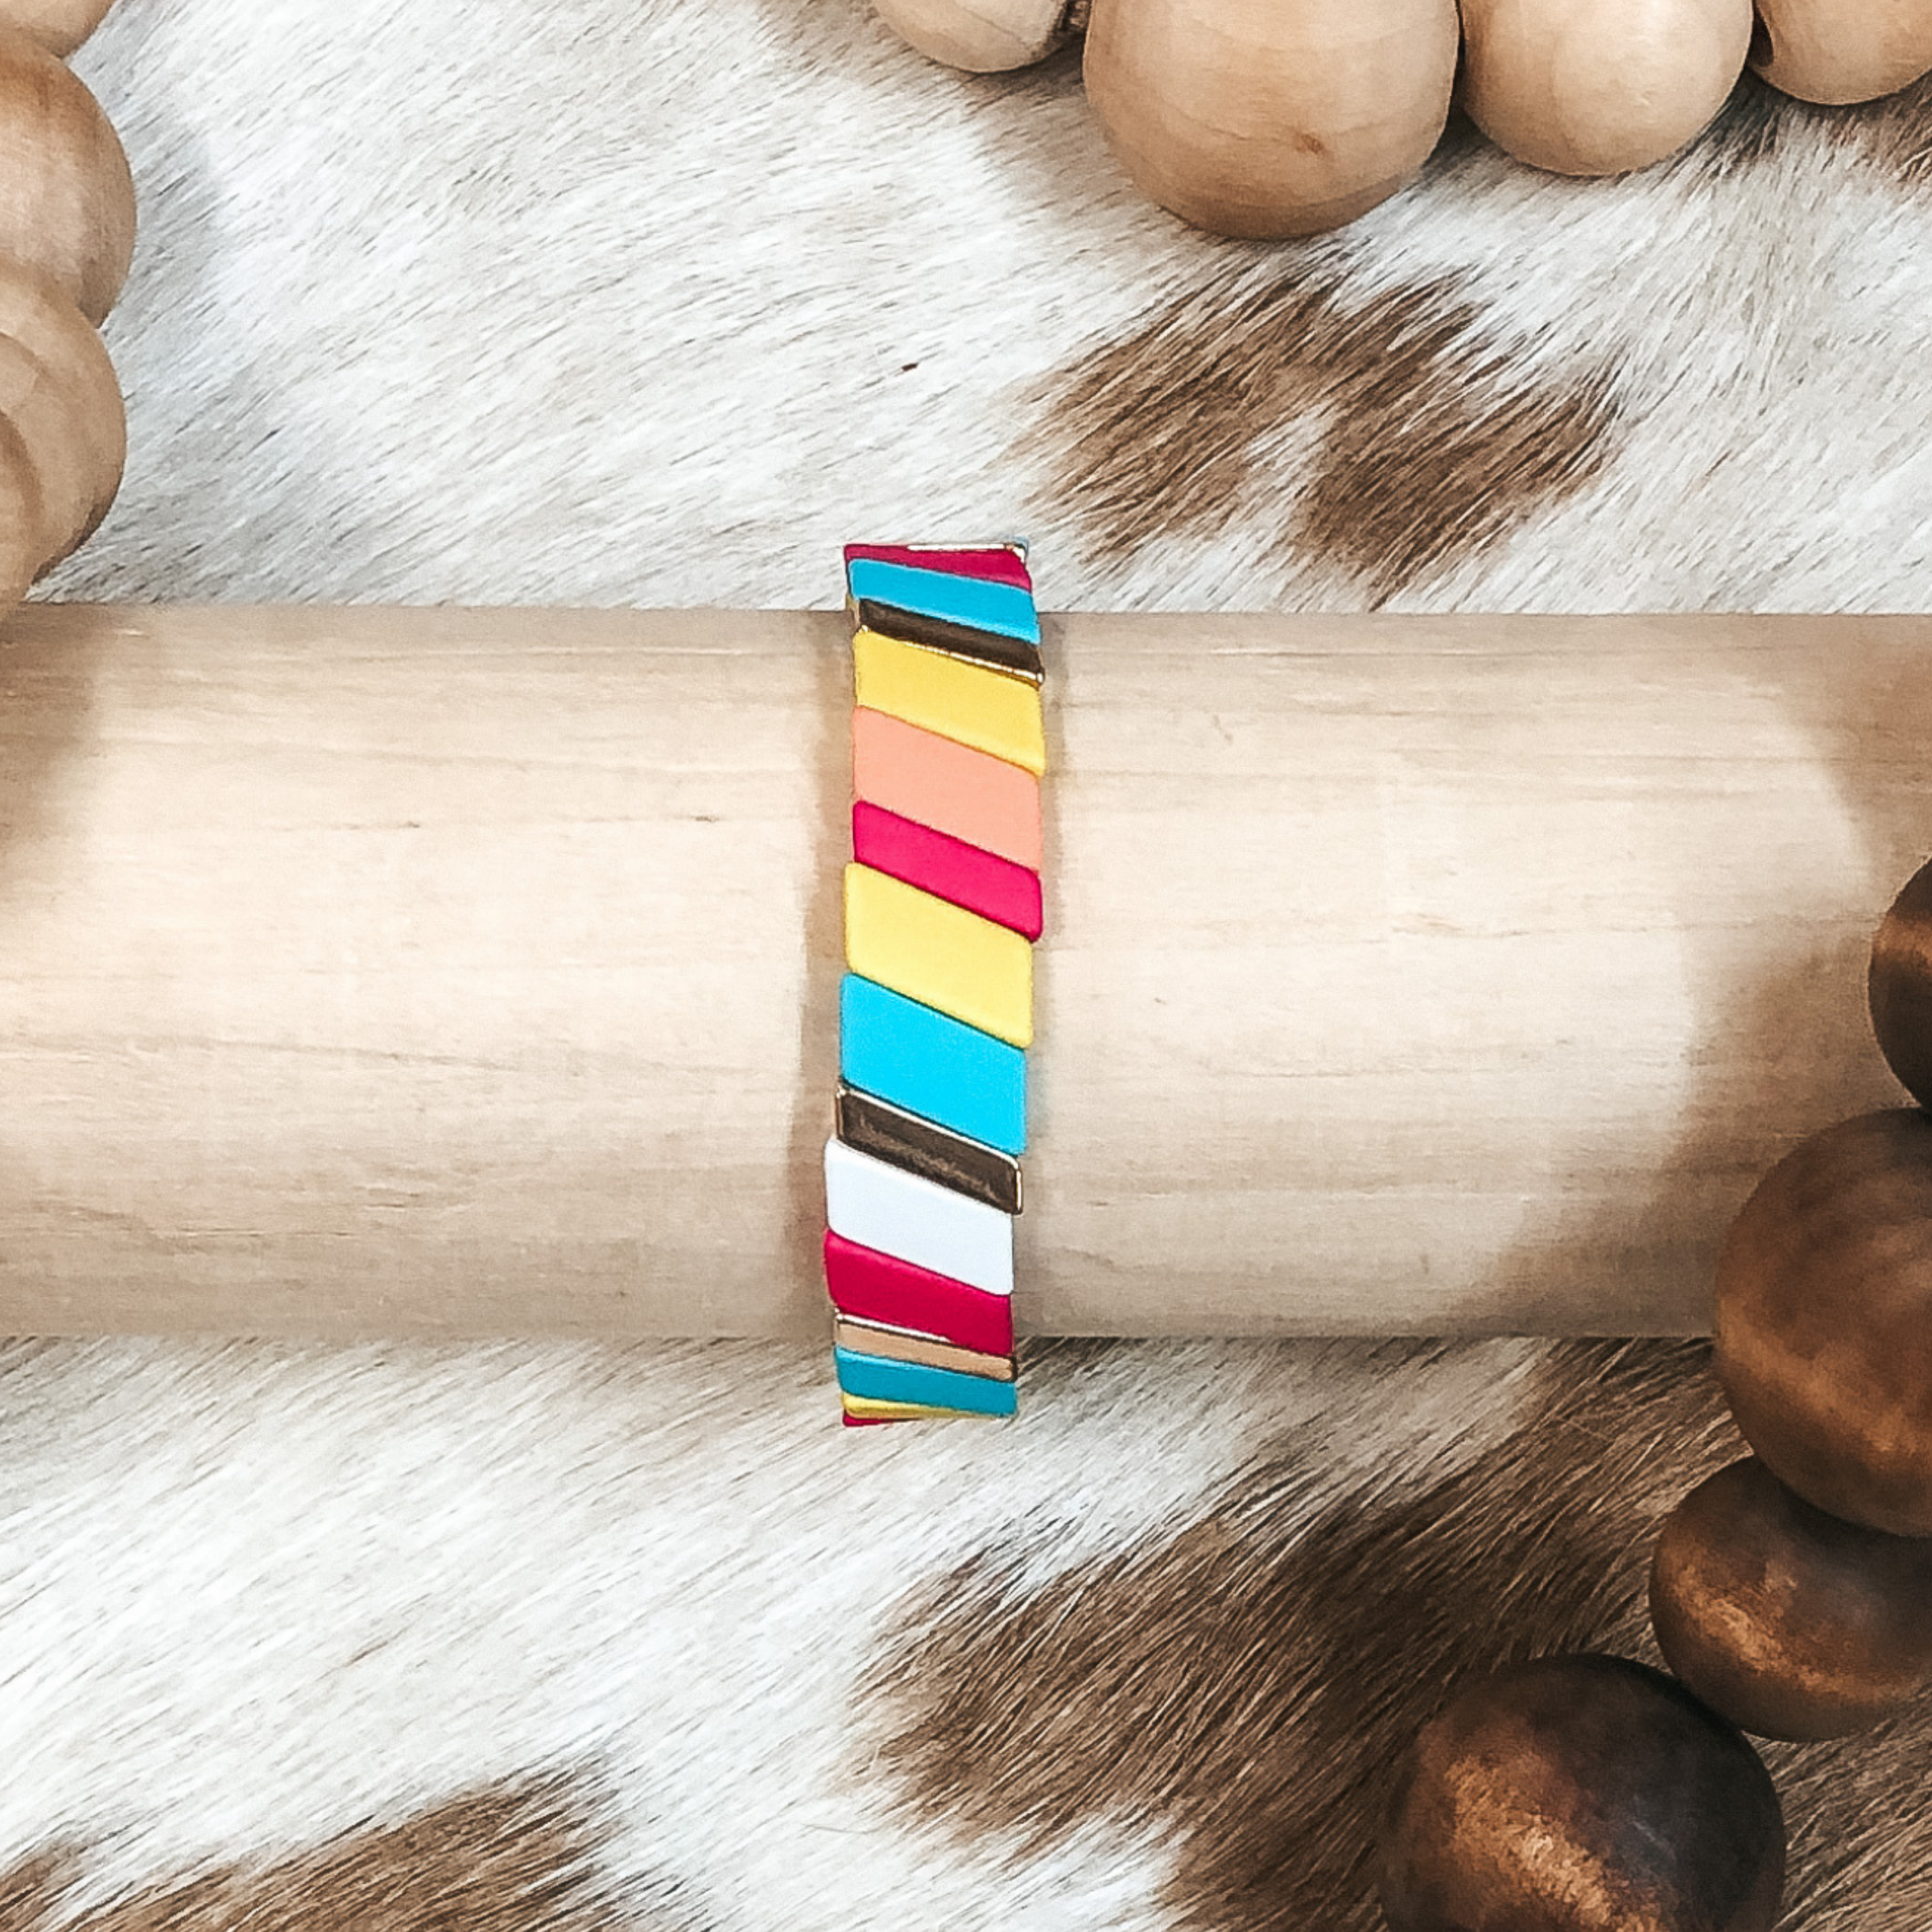 All About Matte Diagonal Bracelet in Multicolored - Giddy Up Glamour Boutique